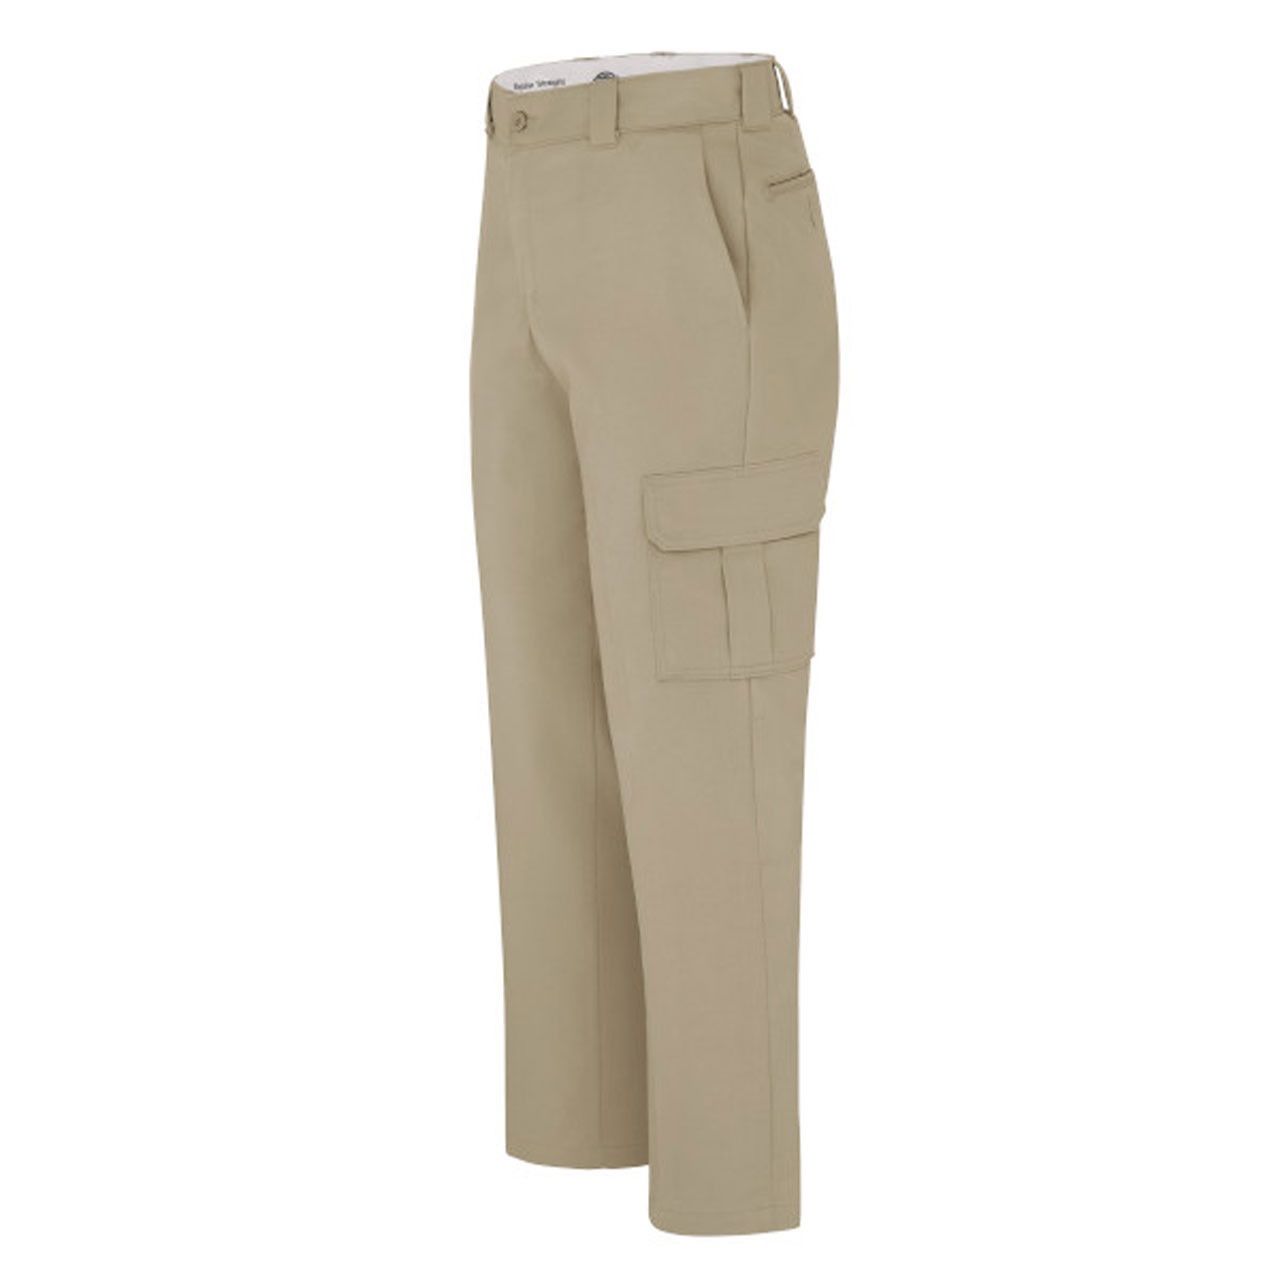 Before I buy, what's the waistband width of the wp95 Dickies® Men's Cargo Pant?